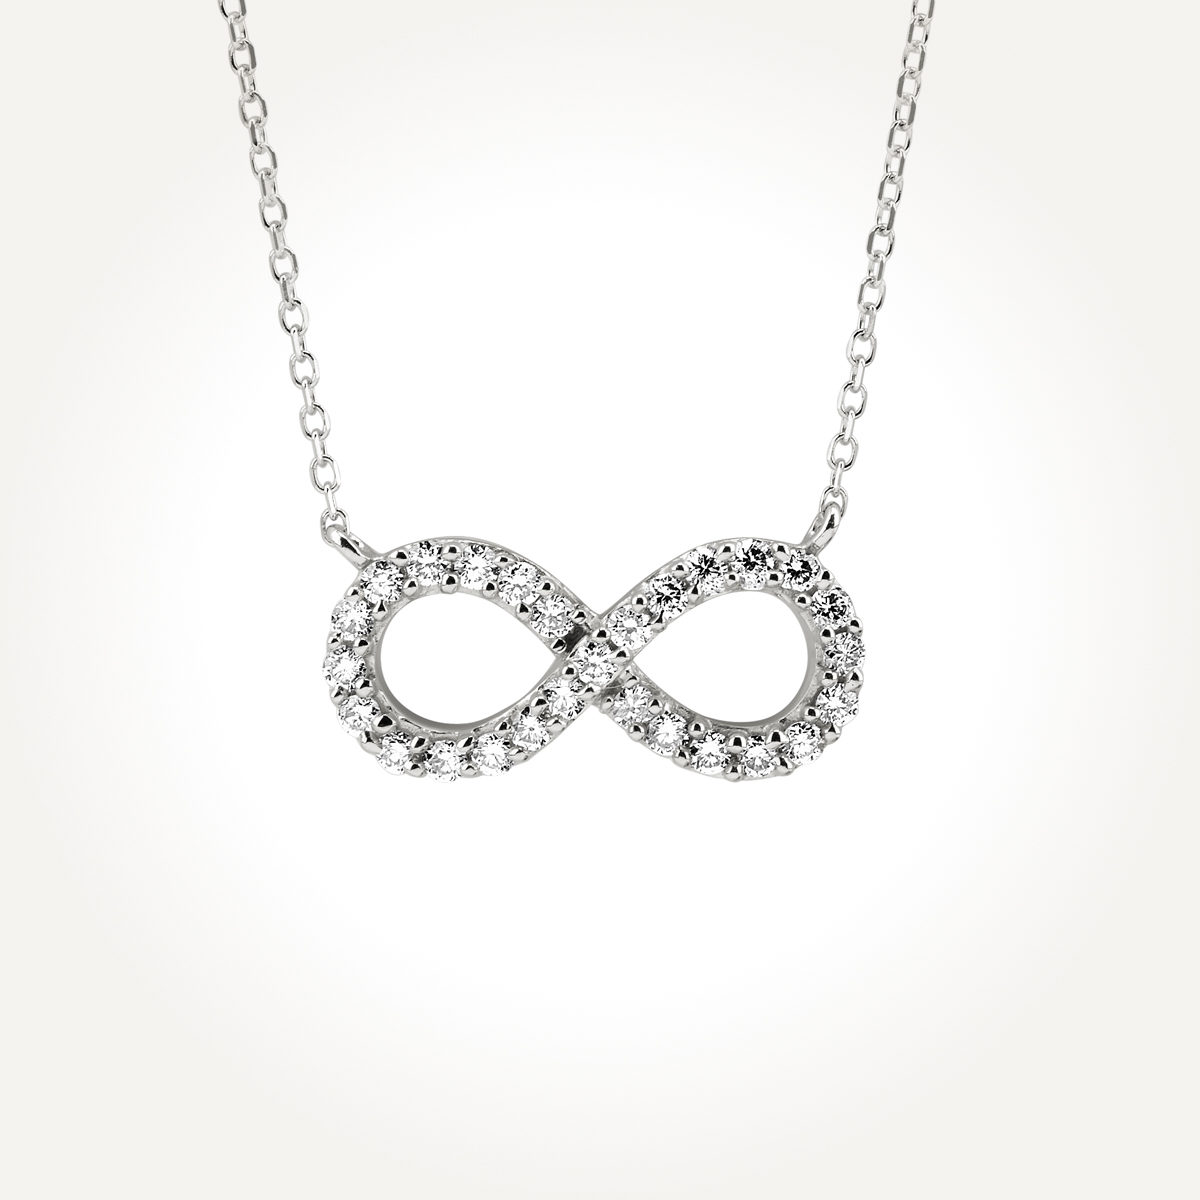 14KT White Gold Infinity Necklace